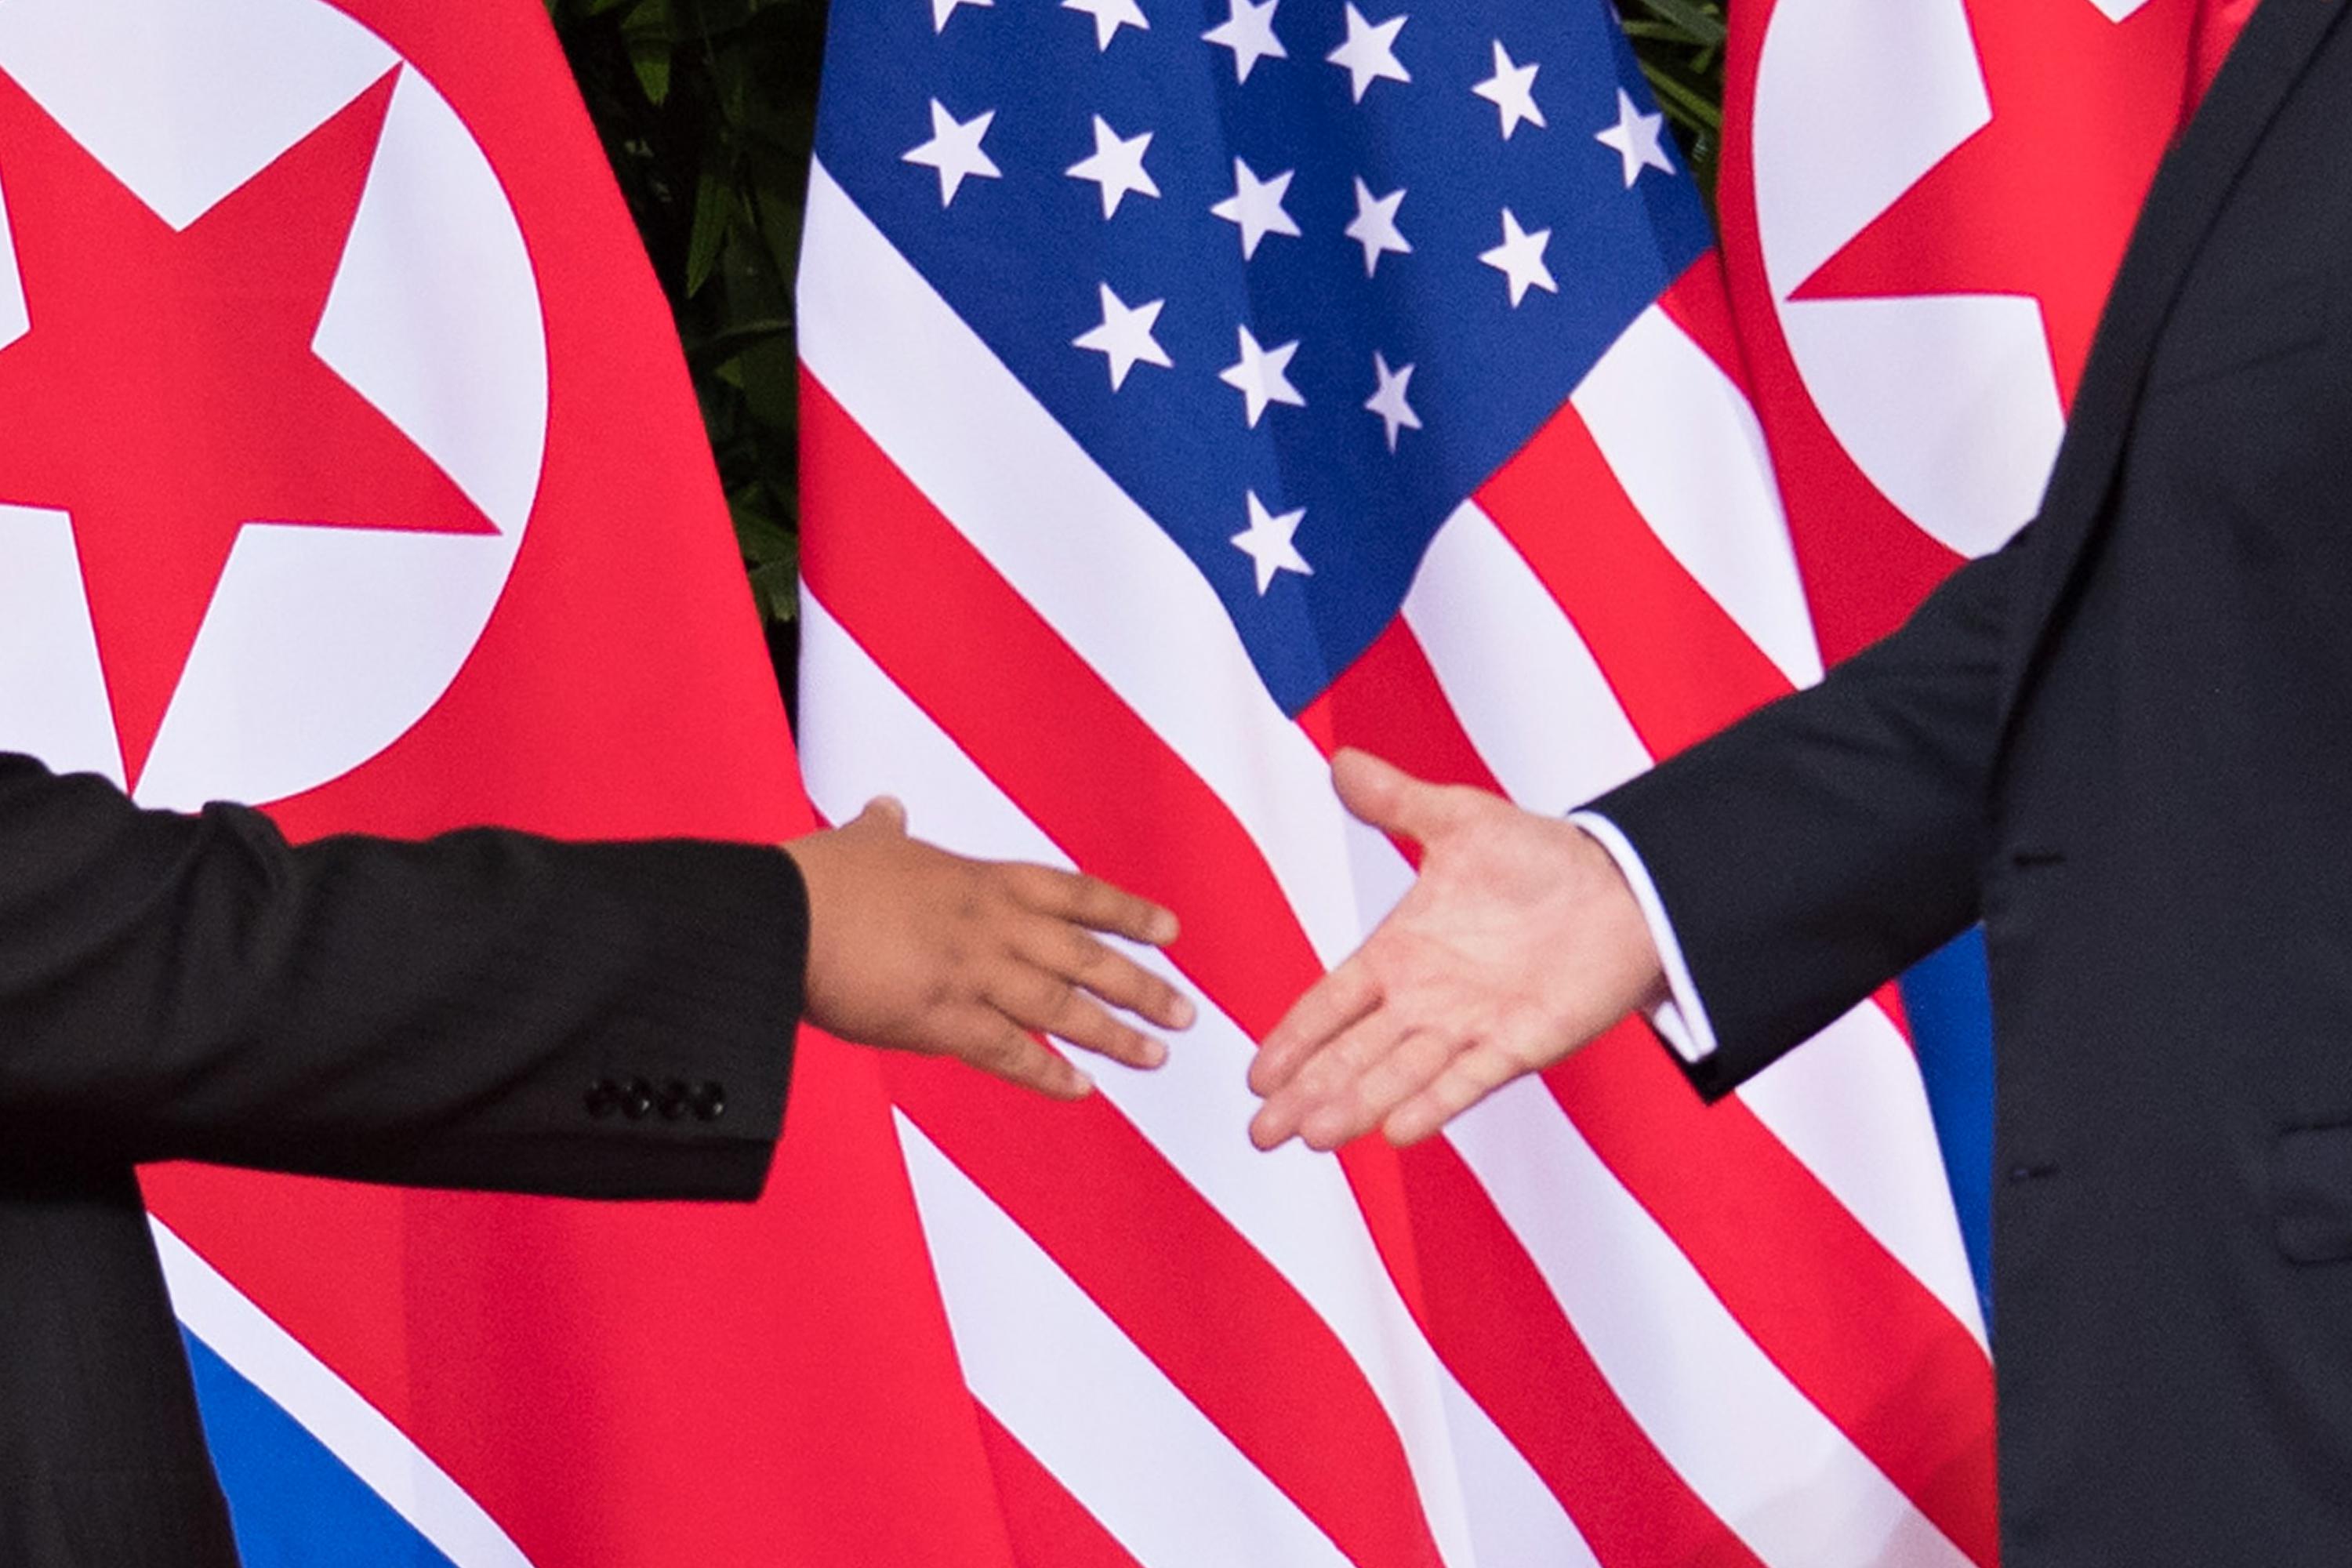 Kim Jong-un and Donald Trump shake hands in front of North Korean and U.S. flags.